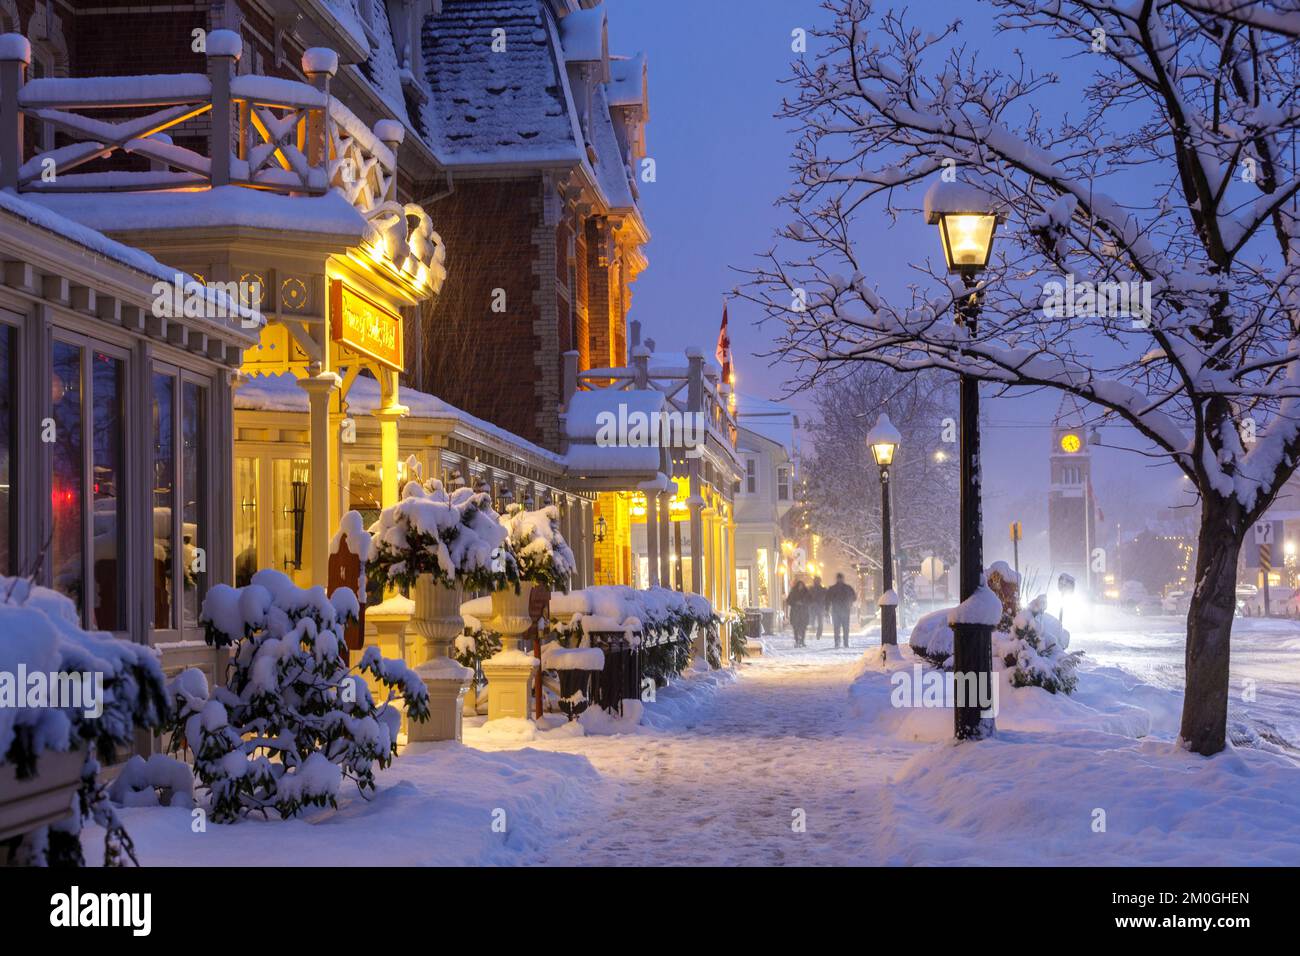 Canada, Ontario, Niagara-on-the-Lake, winter scene on Queen Street and the Prince of Wales Hotel on a snowy evening Stock Photo